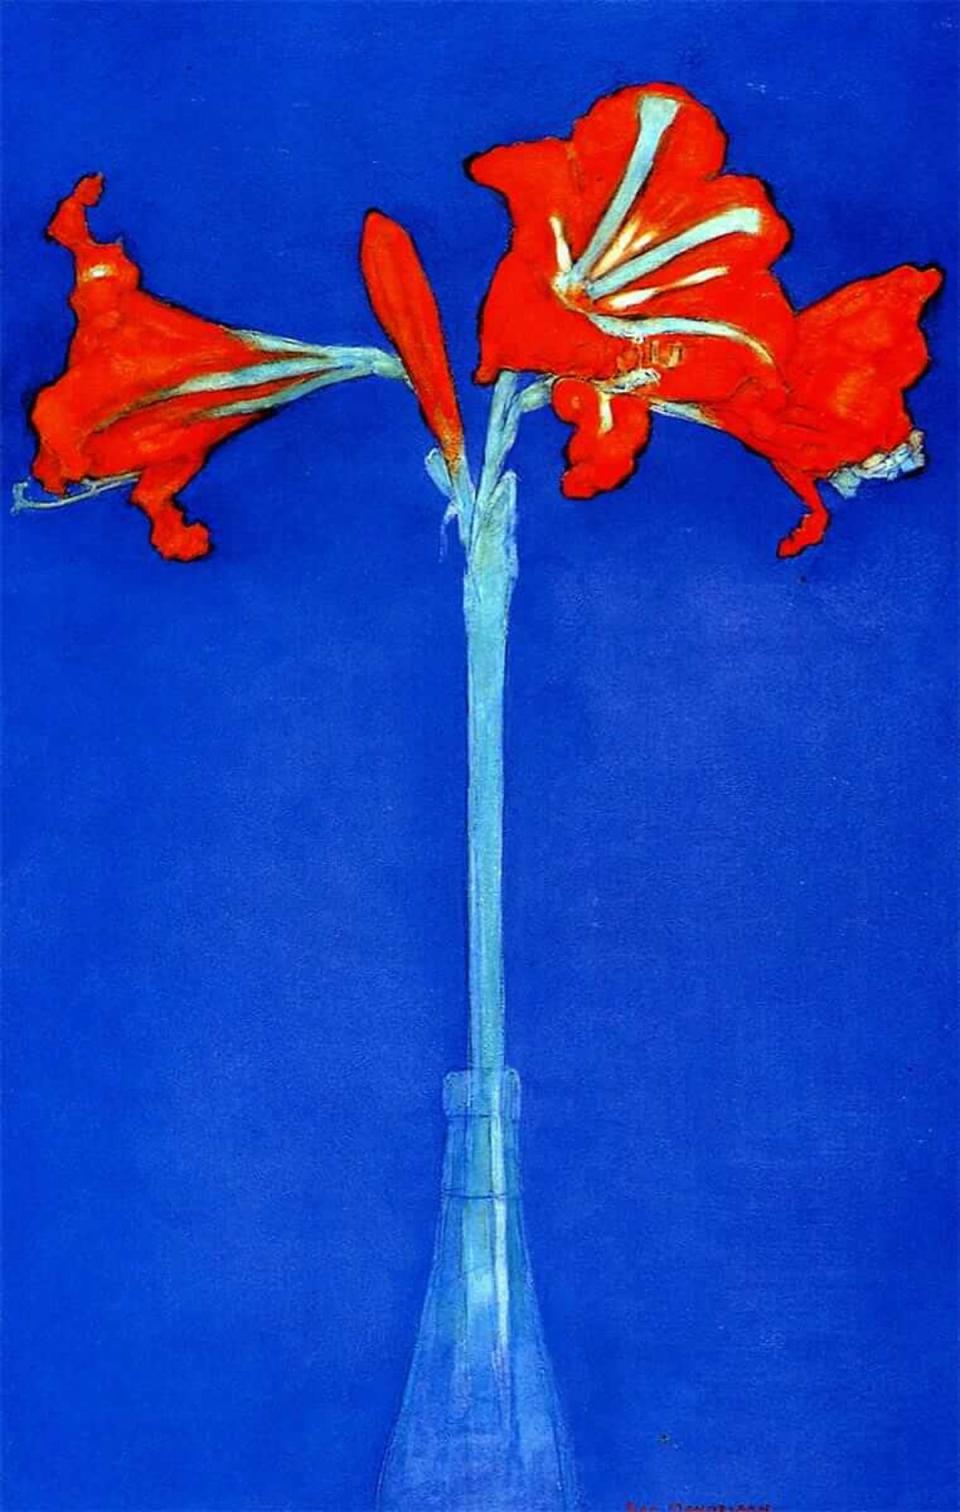 Piet Mondrian, Red Amaryllis with blue background, 1909–1910 (Private Collection)